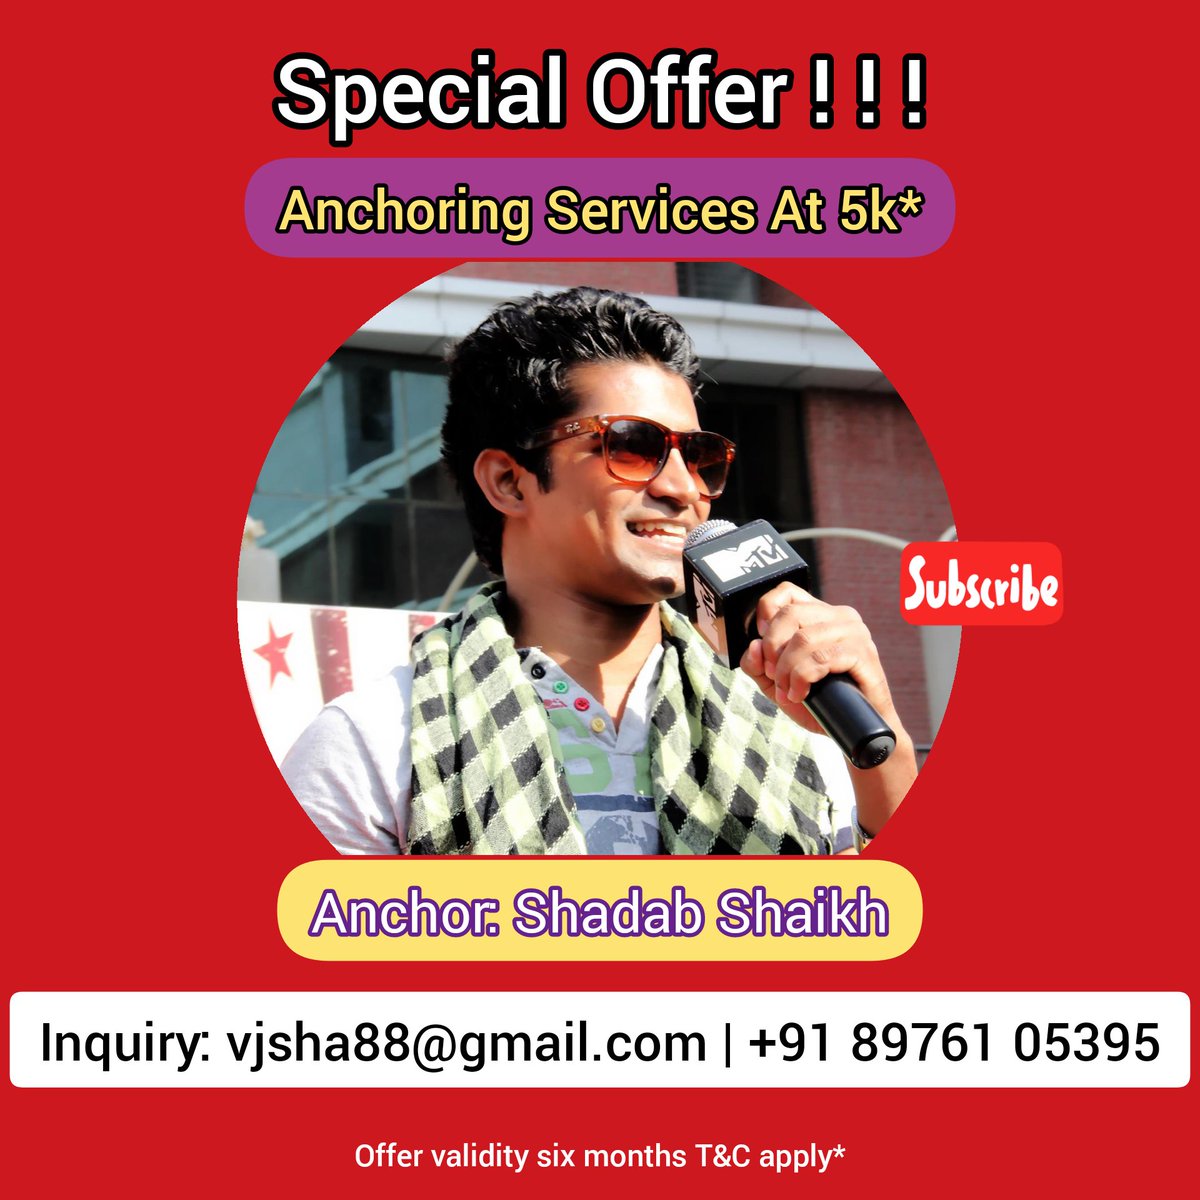 Hello Folks!

Grab this special offer of the month!

ANCHORING SERVICES at Rs. 5k*

Inquiry :
vjsha88@gmail.com
+91 89761 05395

Thanks,
Shadab

T&c apply*

#eventplanningservices #eventprofs #partyplanner  #anchoringservices #emcee #rewardsandrecognition  #anchorshadabshaikh